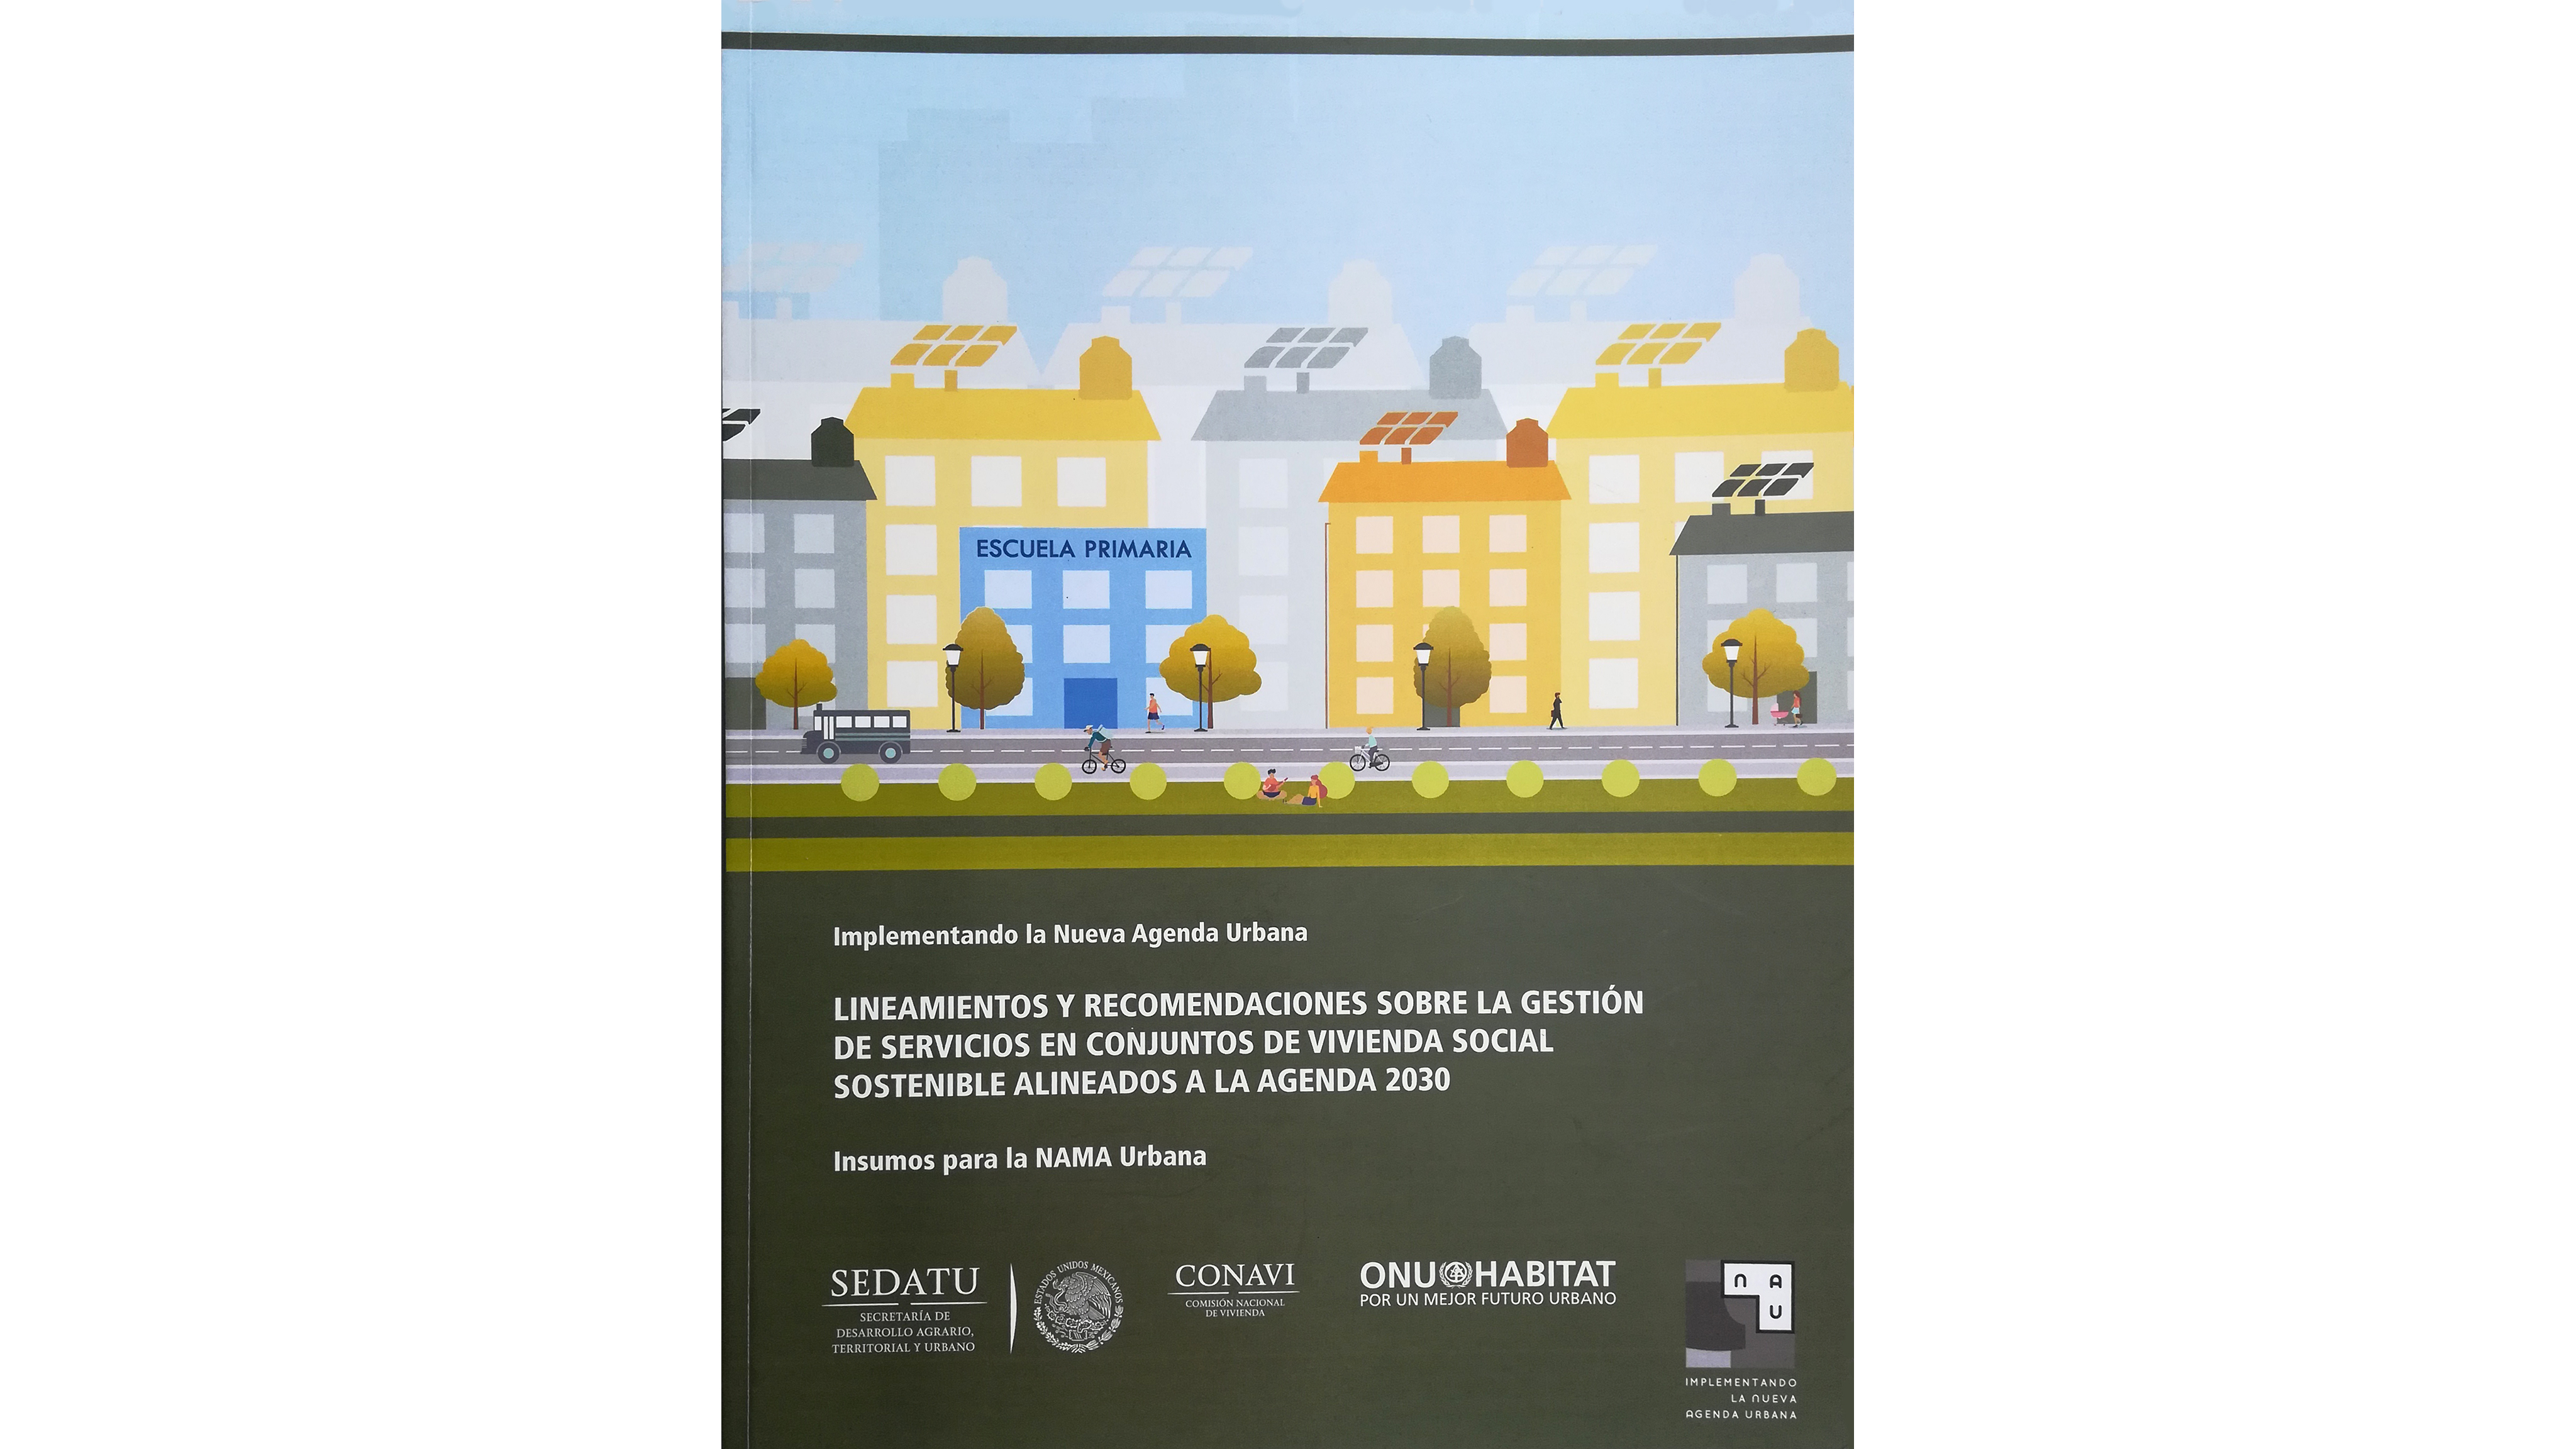 Guidelines and recommendations on service management in sustainable social housing developments aligned with the 2030 New Urban Agenda